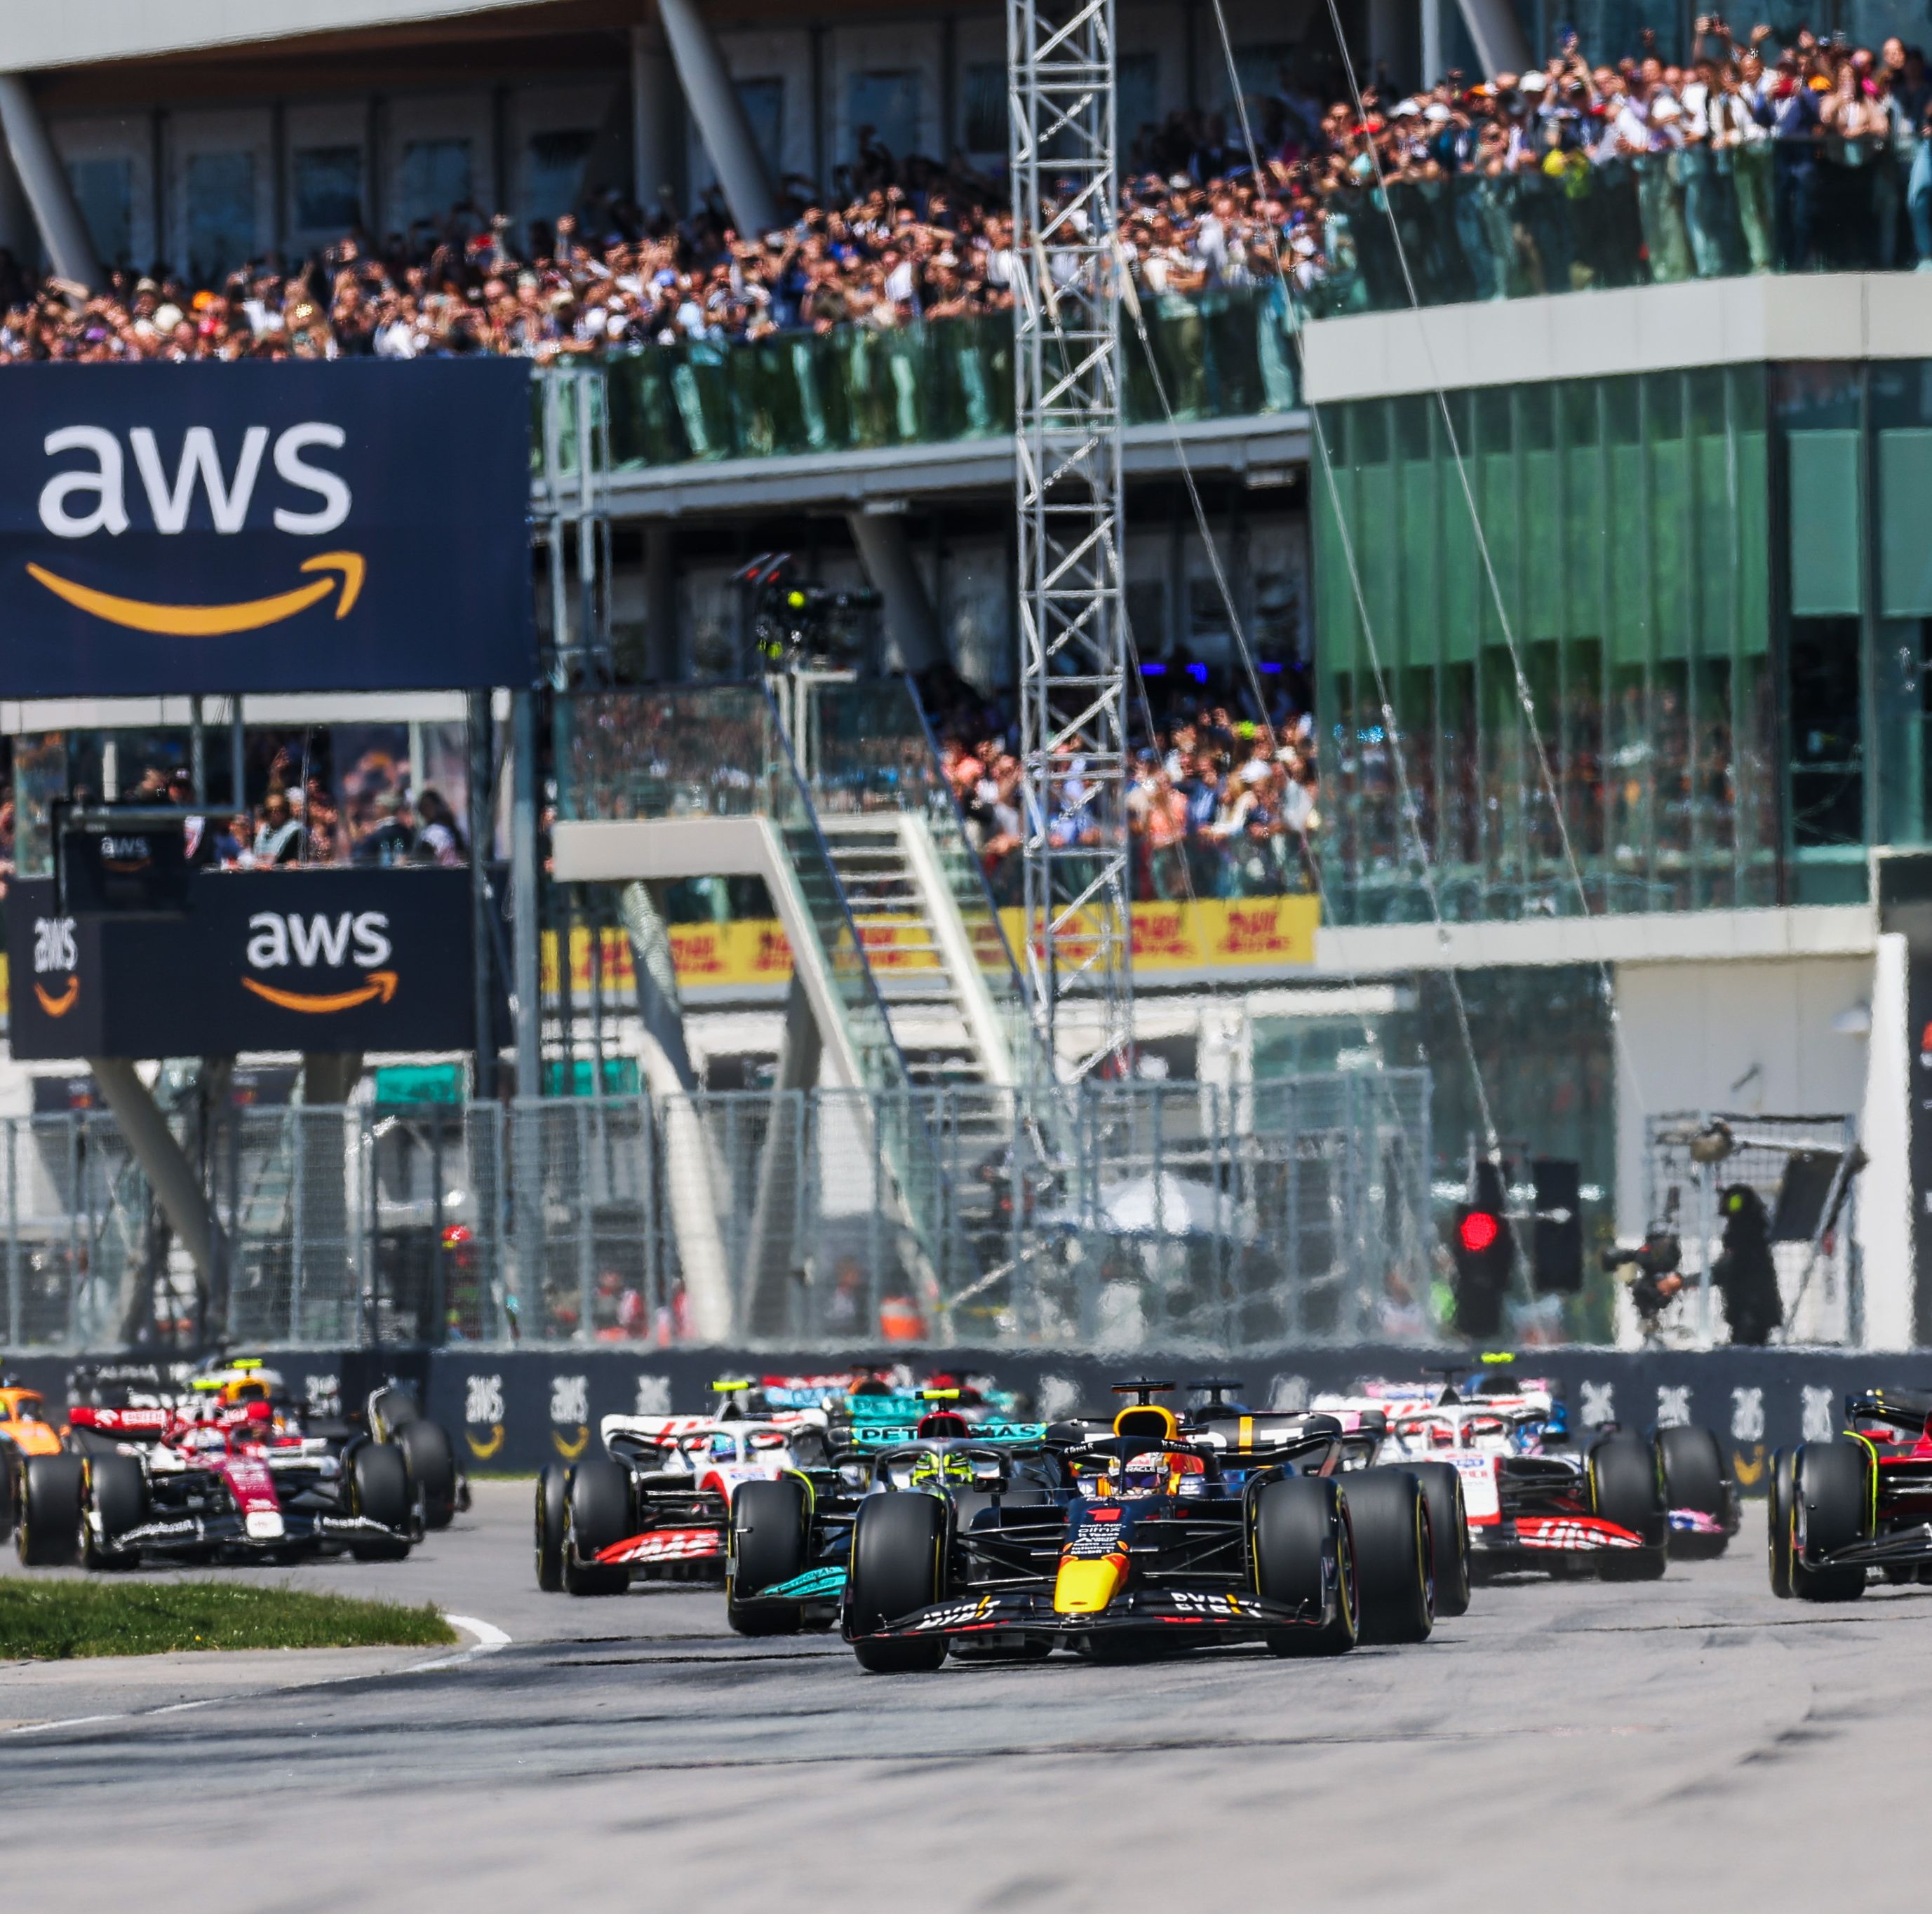 Postcard from F1 Canadian Grand Prix: What You May Have Missed